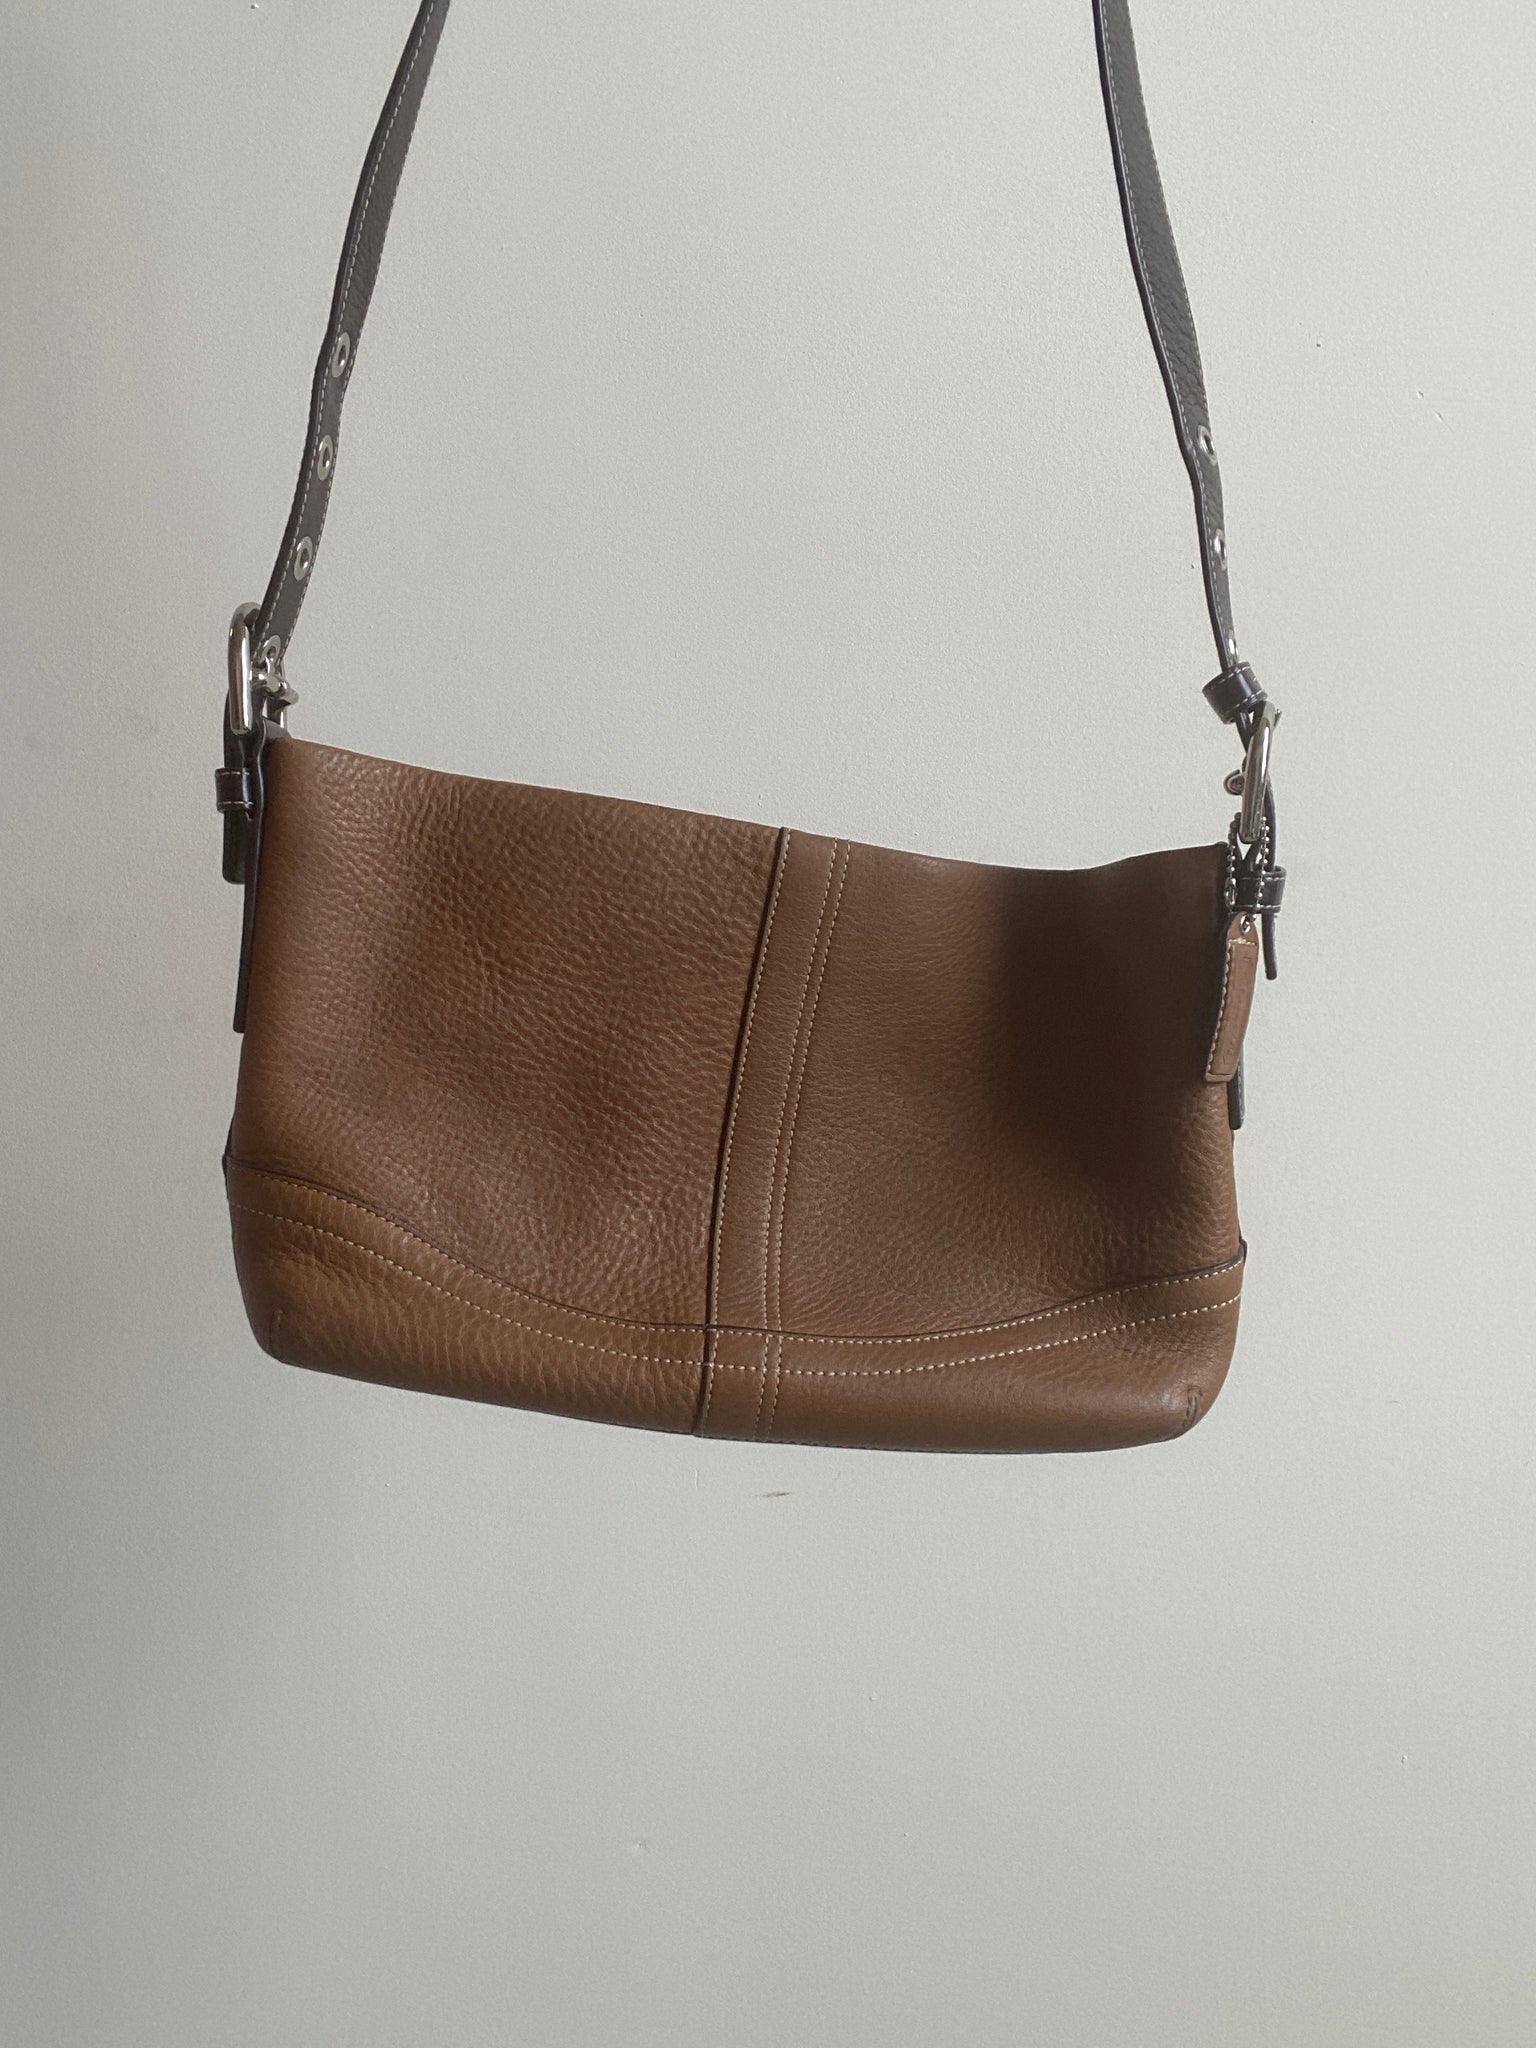 Vintage Coach Two Tone Brown Leather Bag